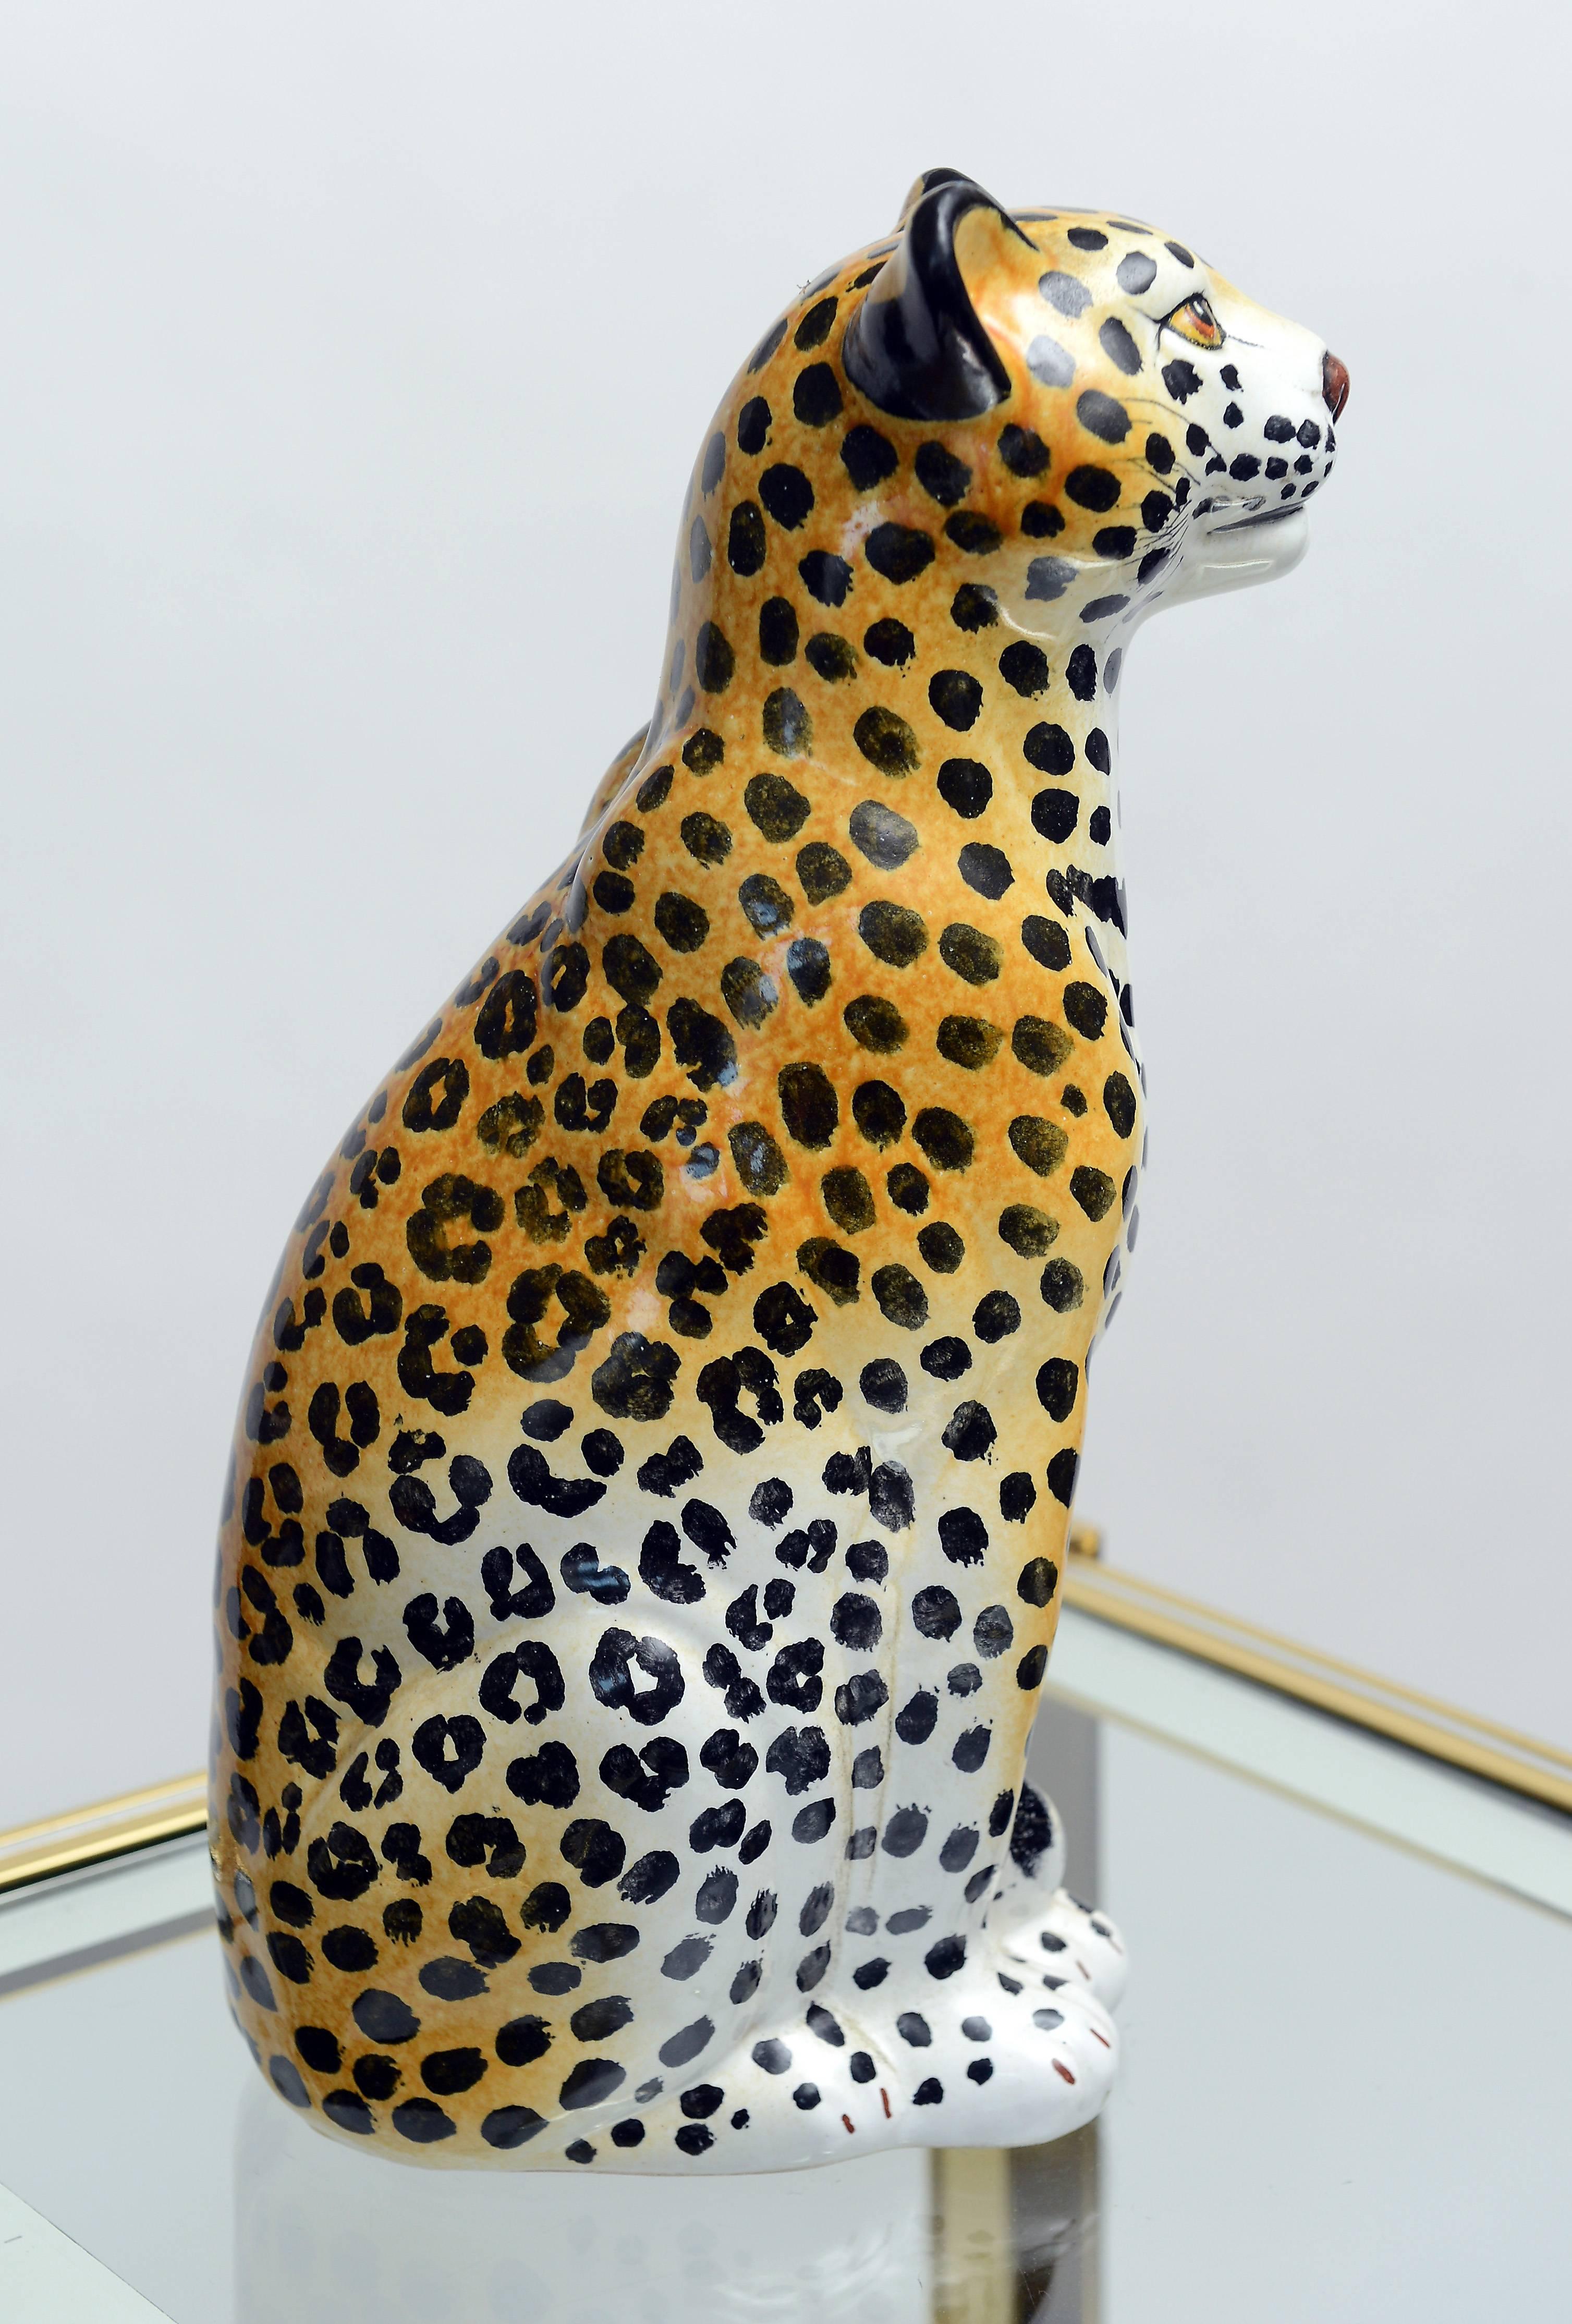 An Italian vintage sculptural leopard, produced circa 1970s, made from glazed ceramic, depicted sitting upright,

Markings include stamp [Made in Italy] on the base. 

Good vintage condition, 

Measures: Height 40cm (16")

Italy, 1970s.